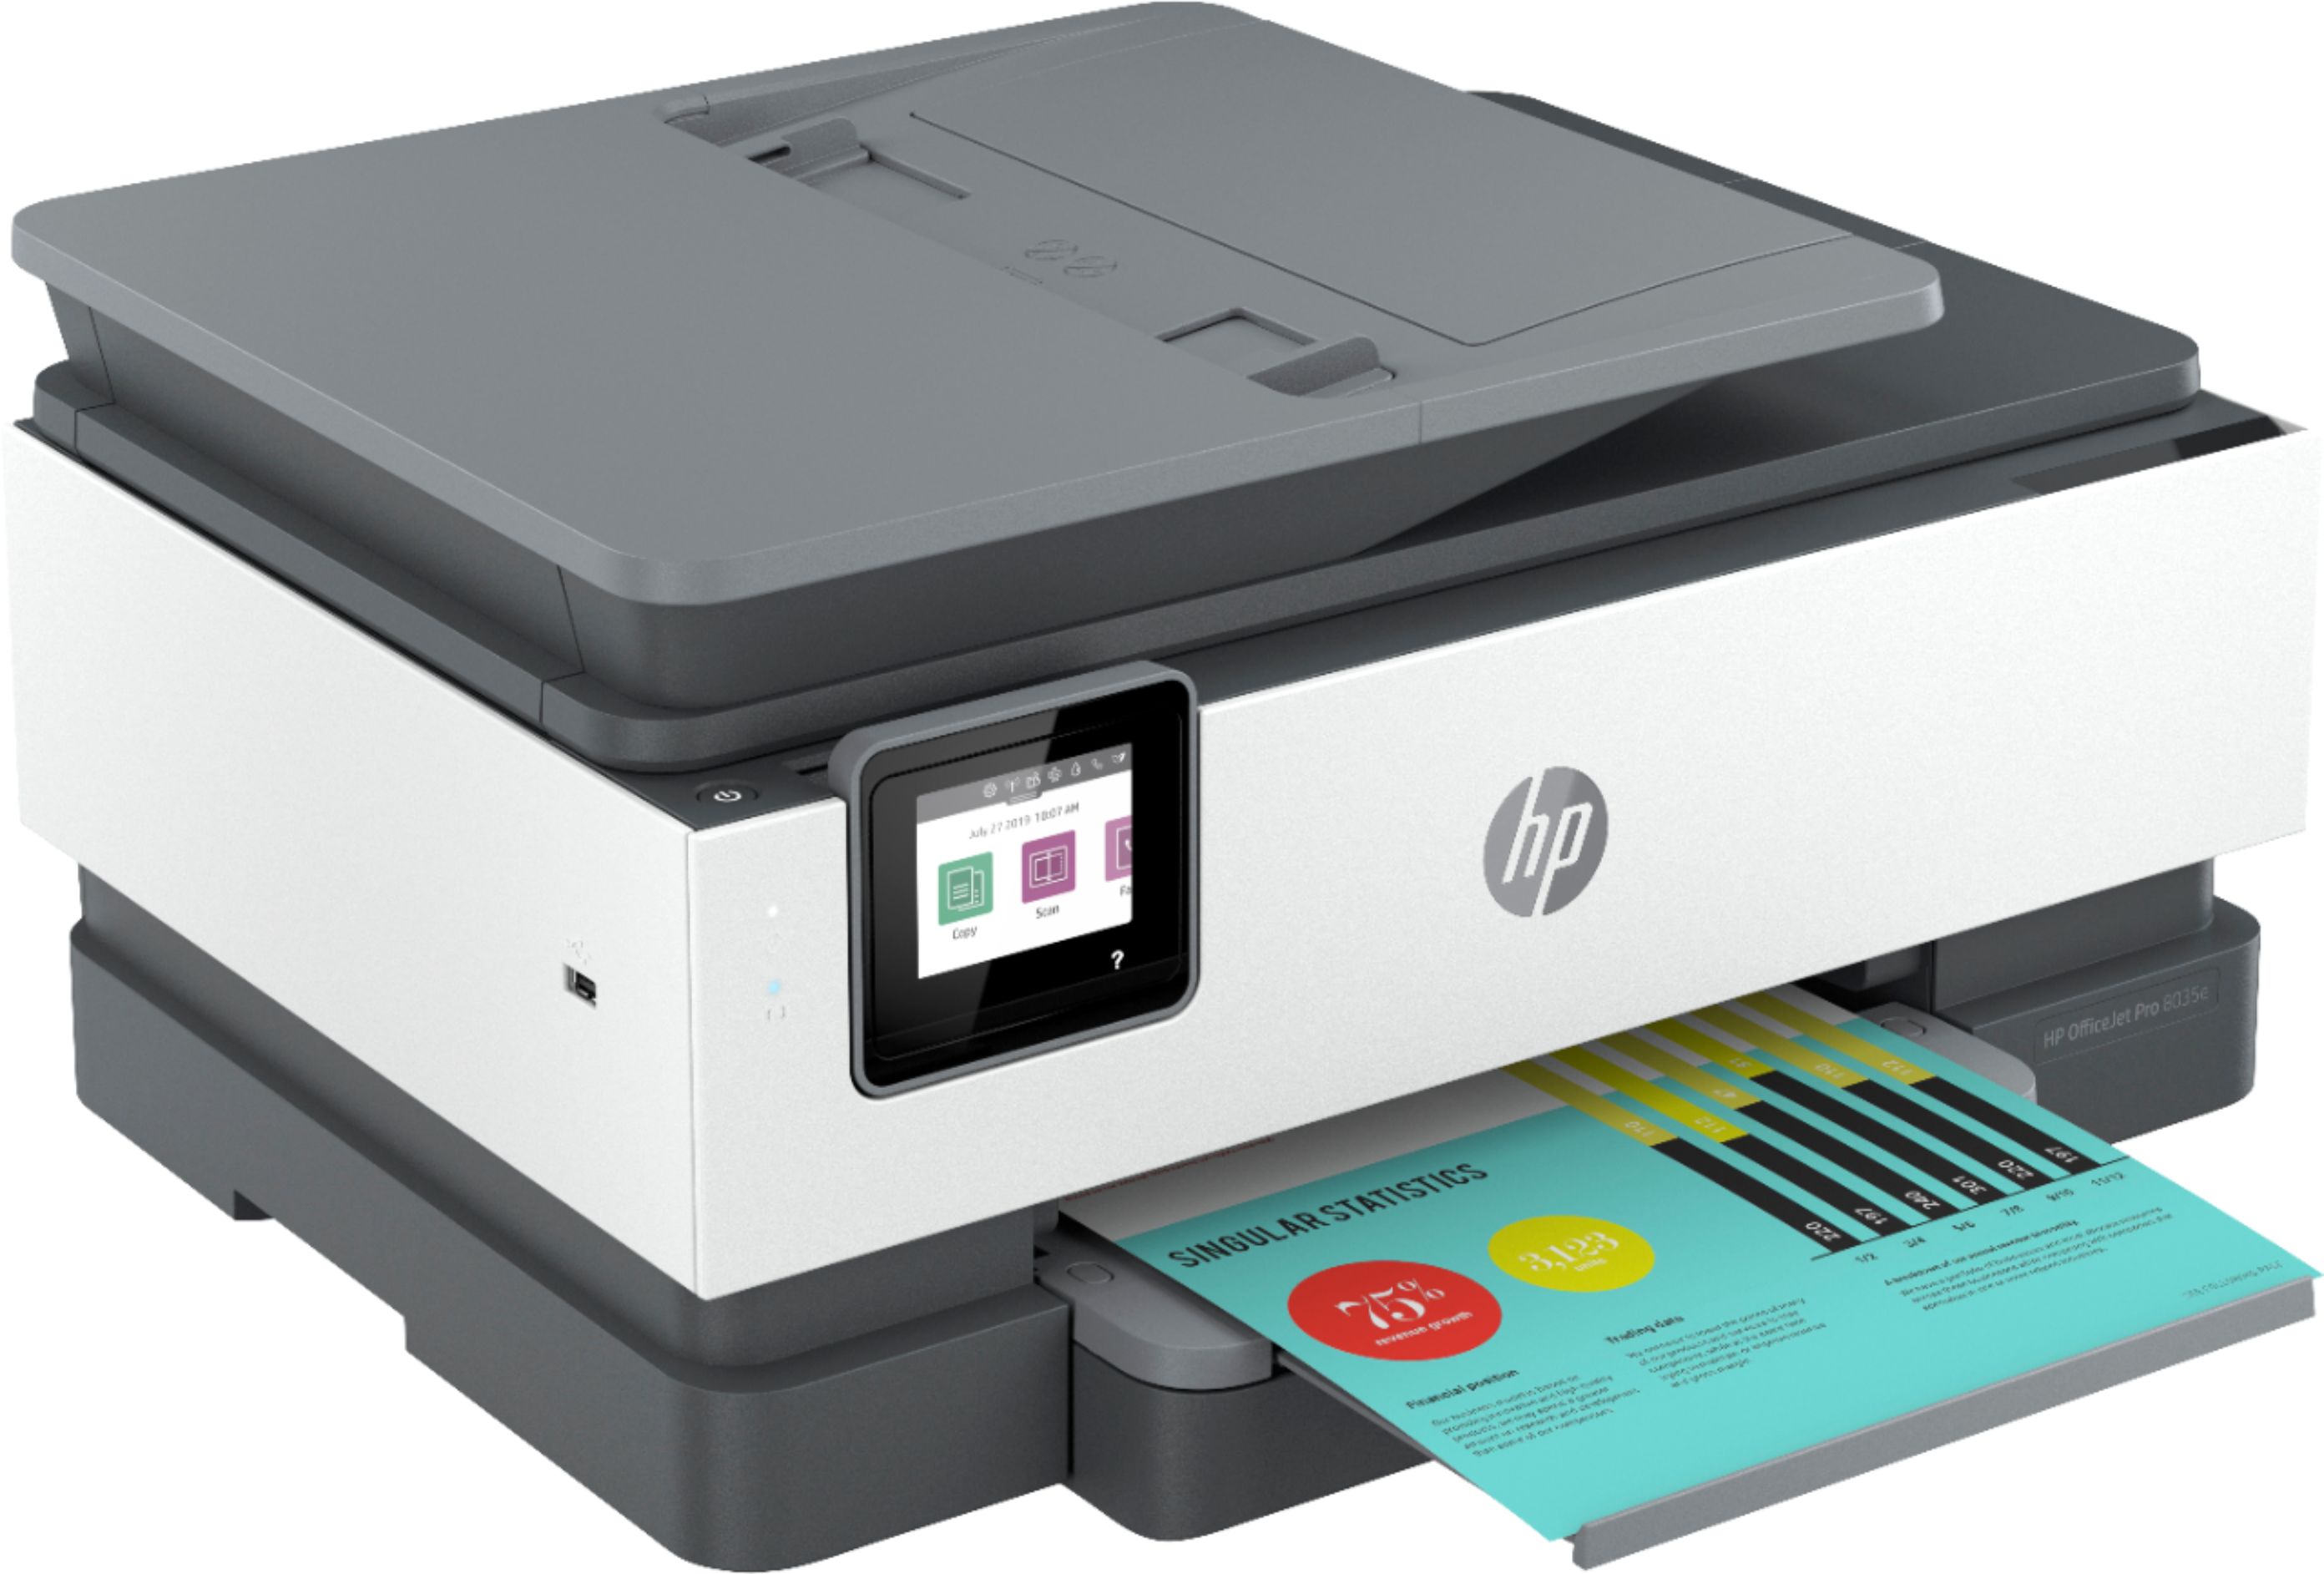 Angle View: HP - OfficeJet Pro 8035e Wireless All-In-One Inkjet Printer with up to 12 months of Instant Ink Included with HP+ - Basalt